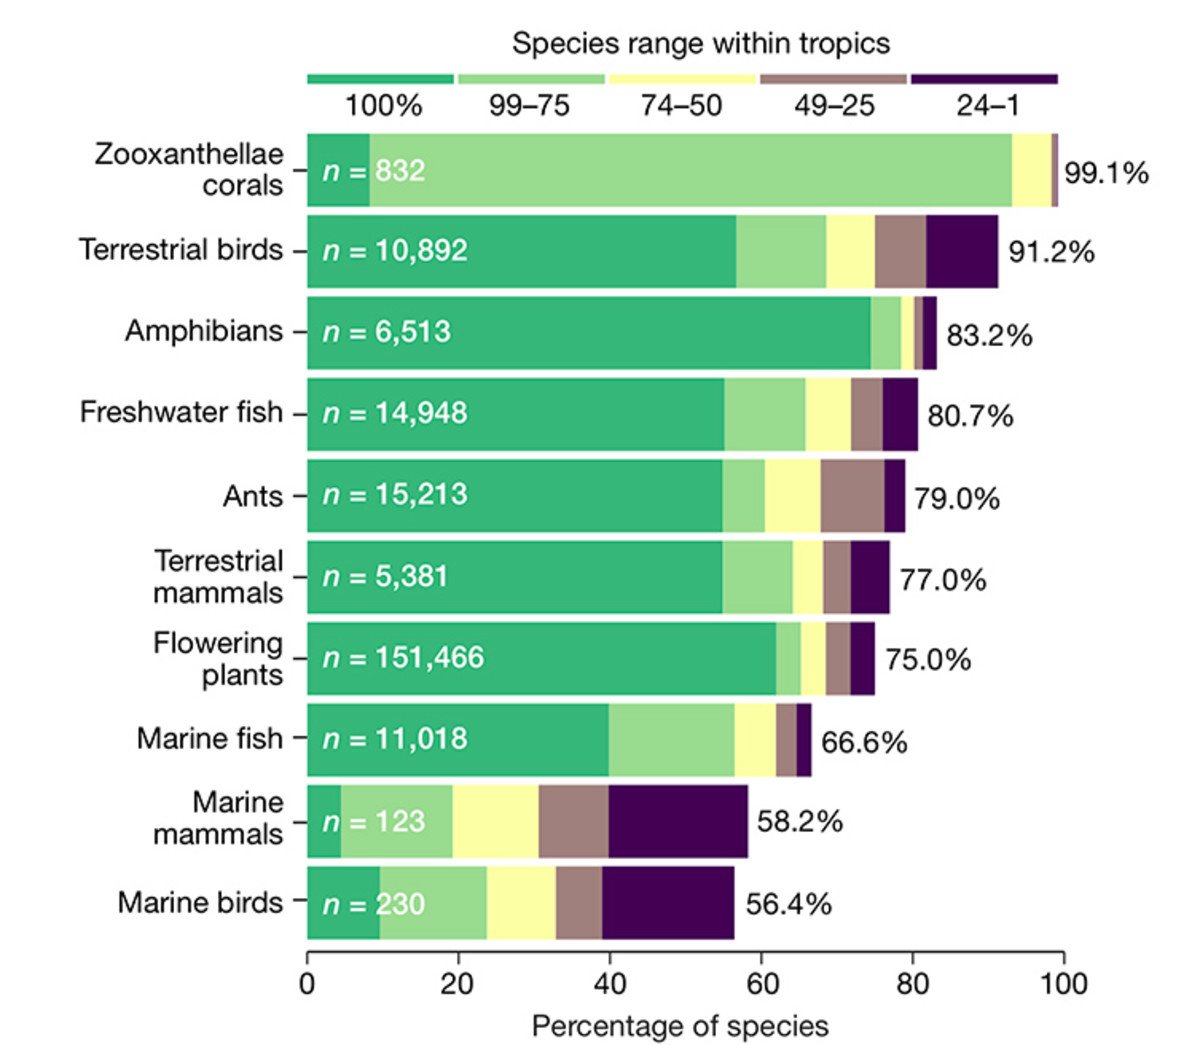 The proportion of species found within tropical latitudes for 10 taxonomic groups. Bars are color-coded to show the percentage of species ranges within the tropics. N gives the total number of species analyzed in each group. Only birds, amphibians, and mammals have been comprehensively sampled. Numbers at the end of the bars give the precise percentage of species whose ranges overlap tropical latitudes, as shown in the bars.